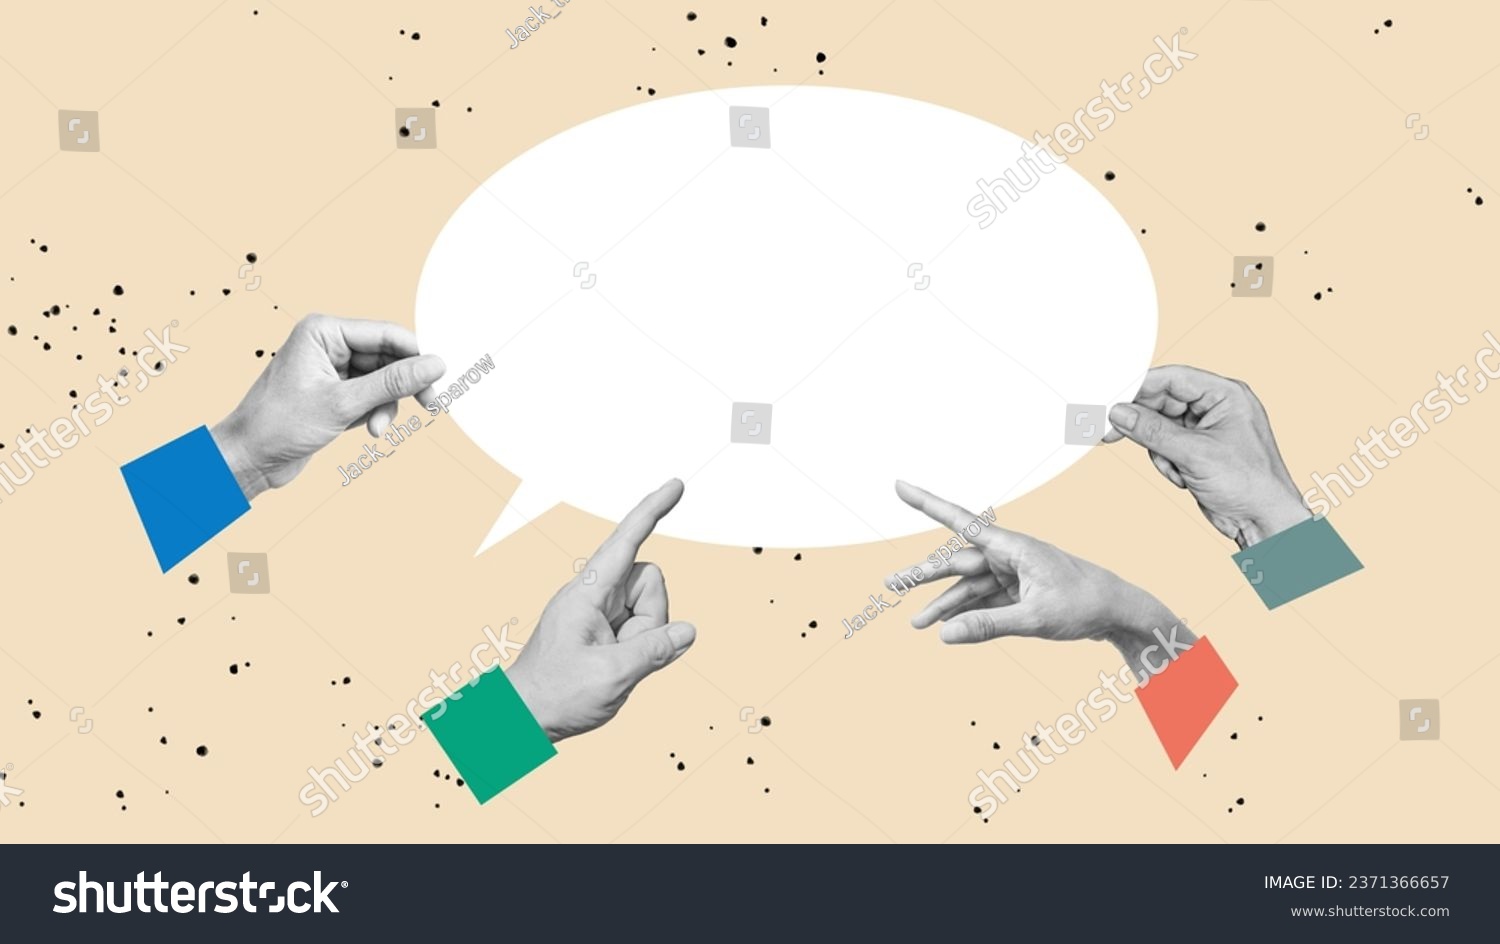 Collage with human hands holding speech bubble symbolizing communication and business cooperation. Concept of business, career development, teamwork, chat, working process. Dialog importance #2371366657